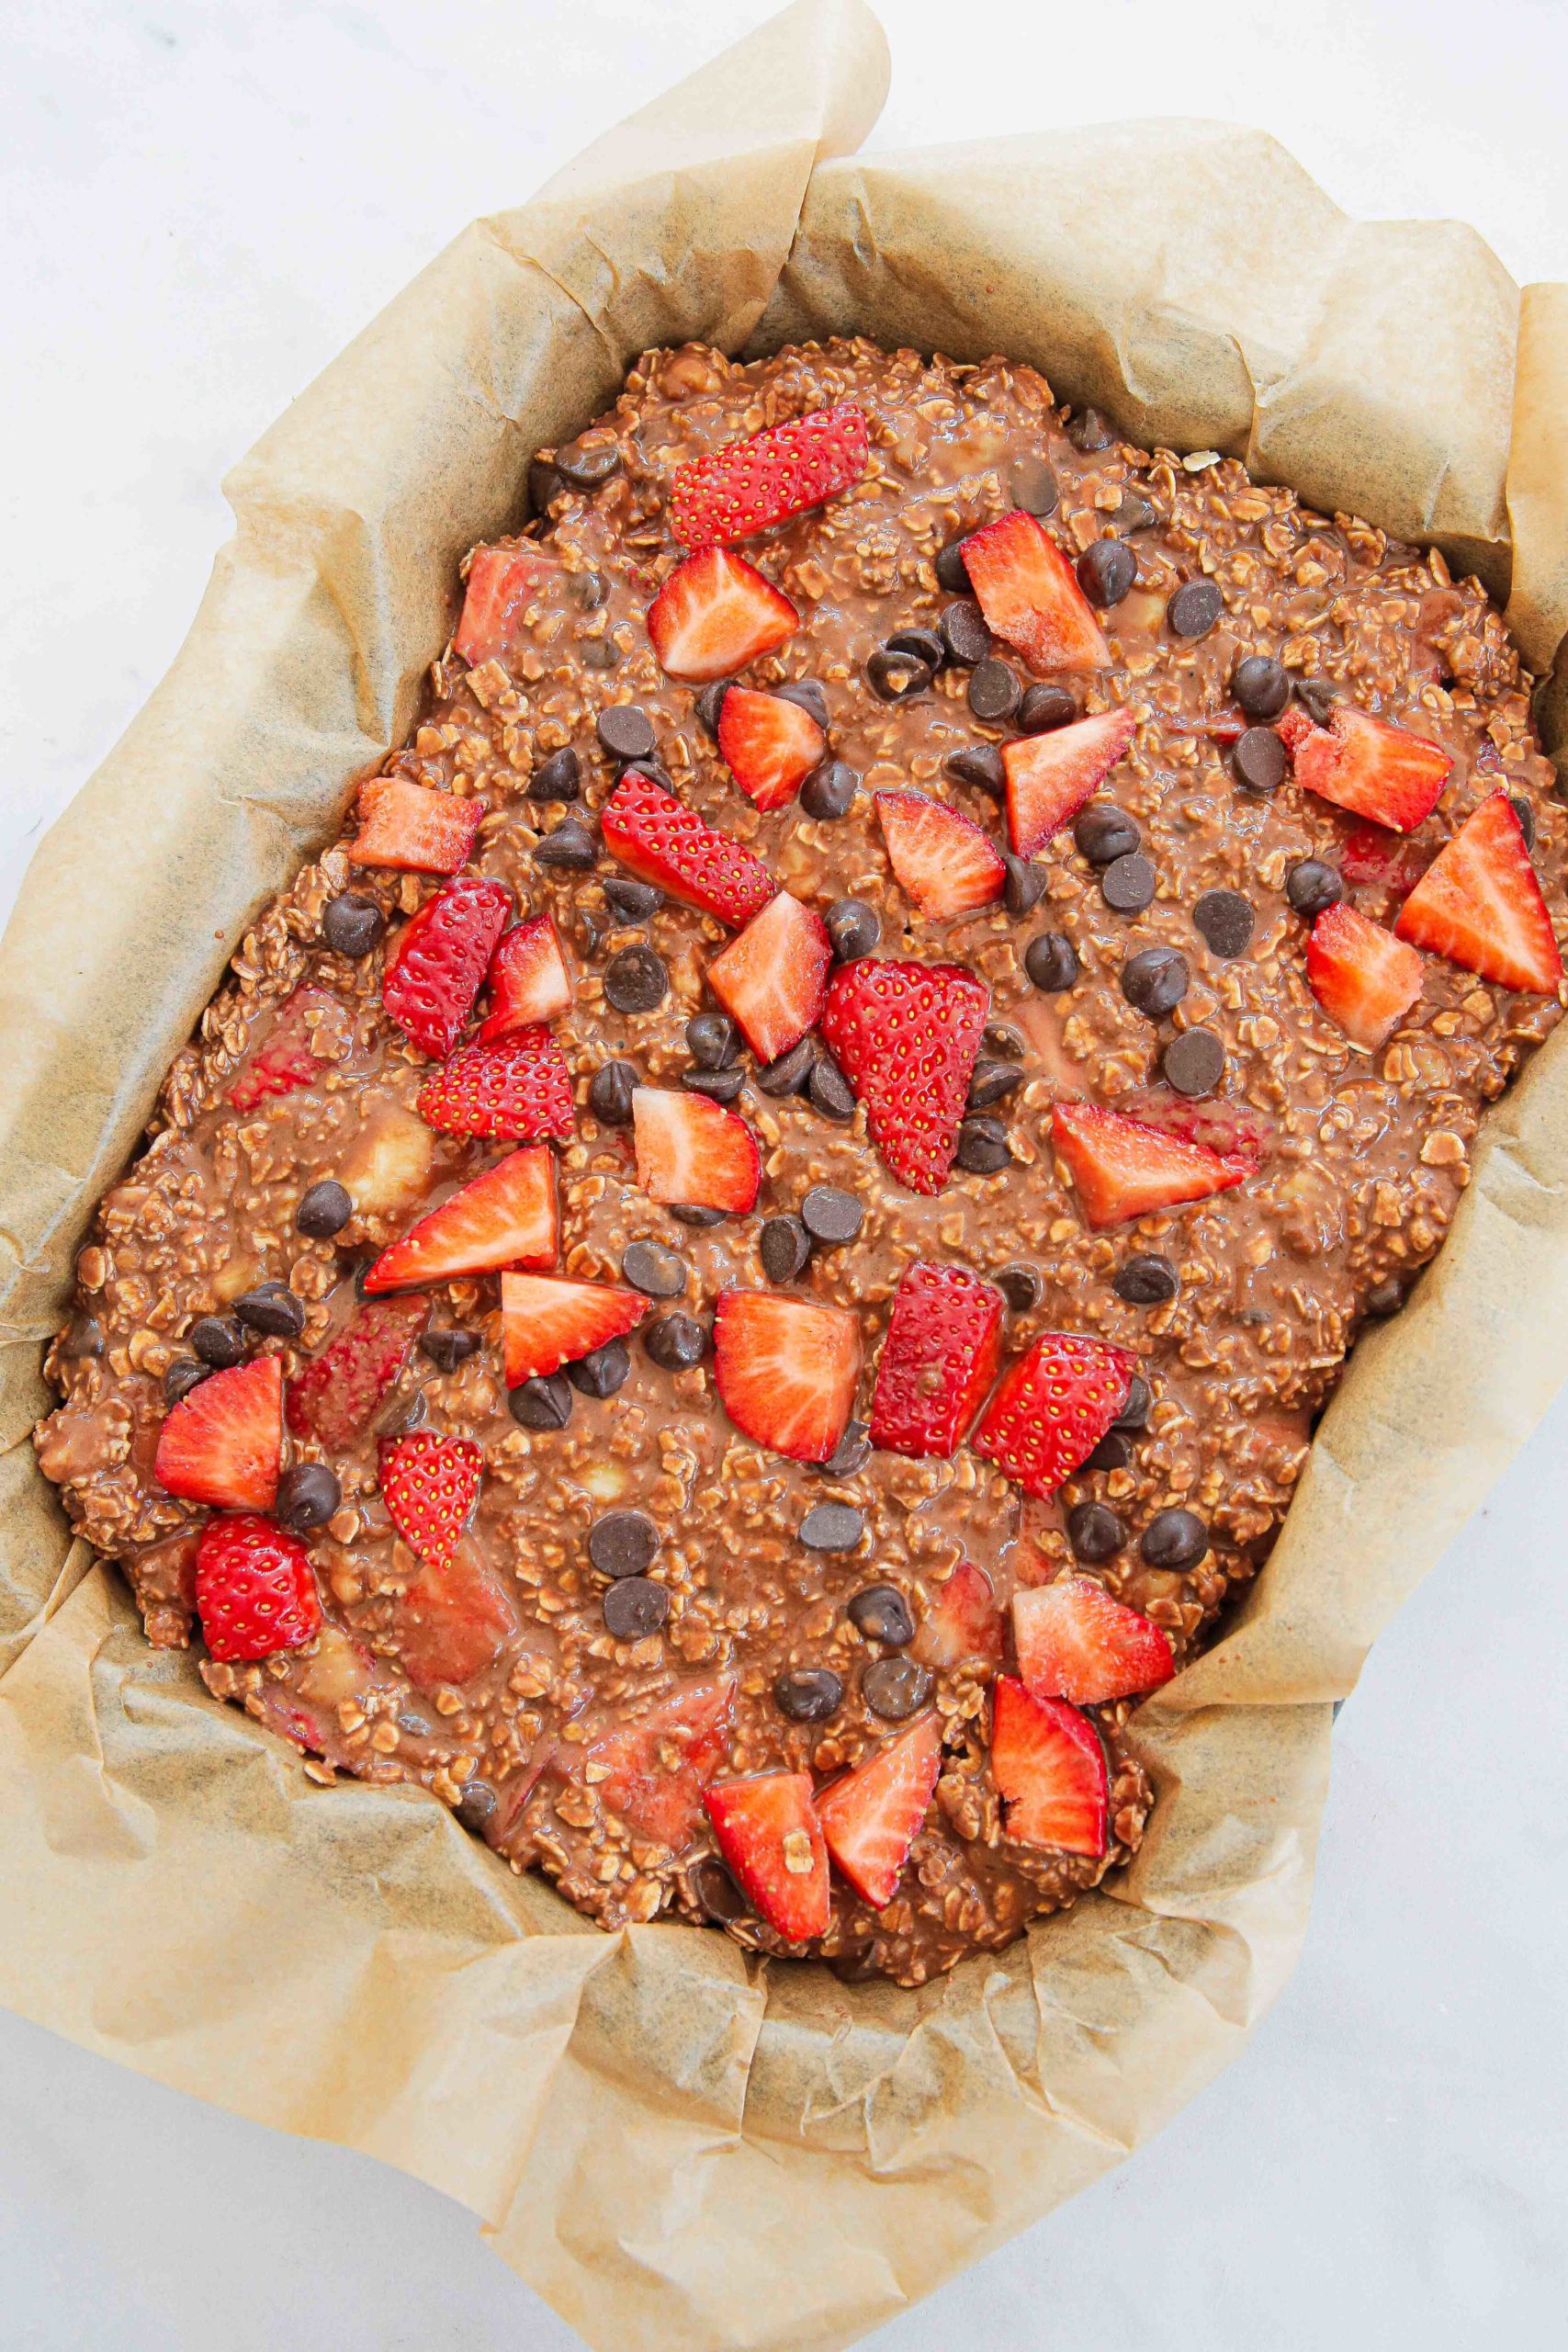 These Strawberry and Chocolate Baked Oats come together in one bowl. They're vegan, gluten free and SO easy. The perfect breakfast! Recipe on thecookandhim.com #bakedoats #bakedoatmeal #chocolatebakedoats #chocolatebakedoatmeal #healthybreakfast #veganbreakfast